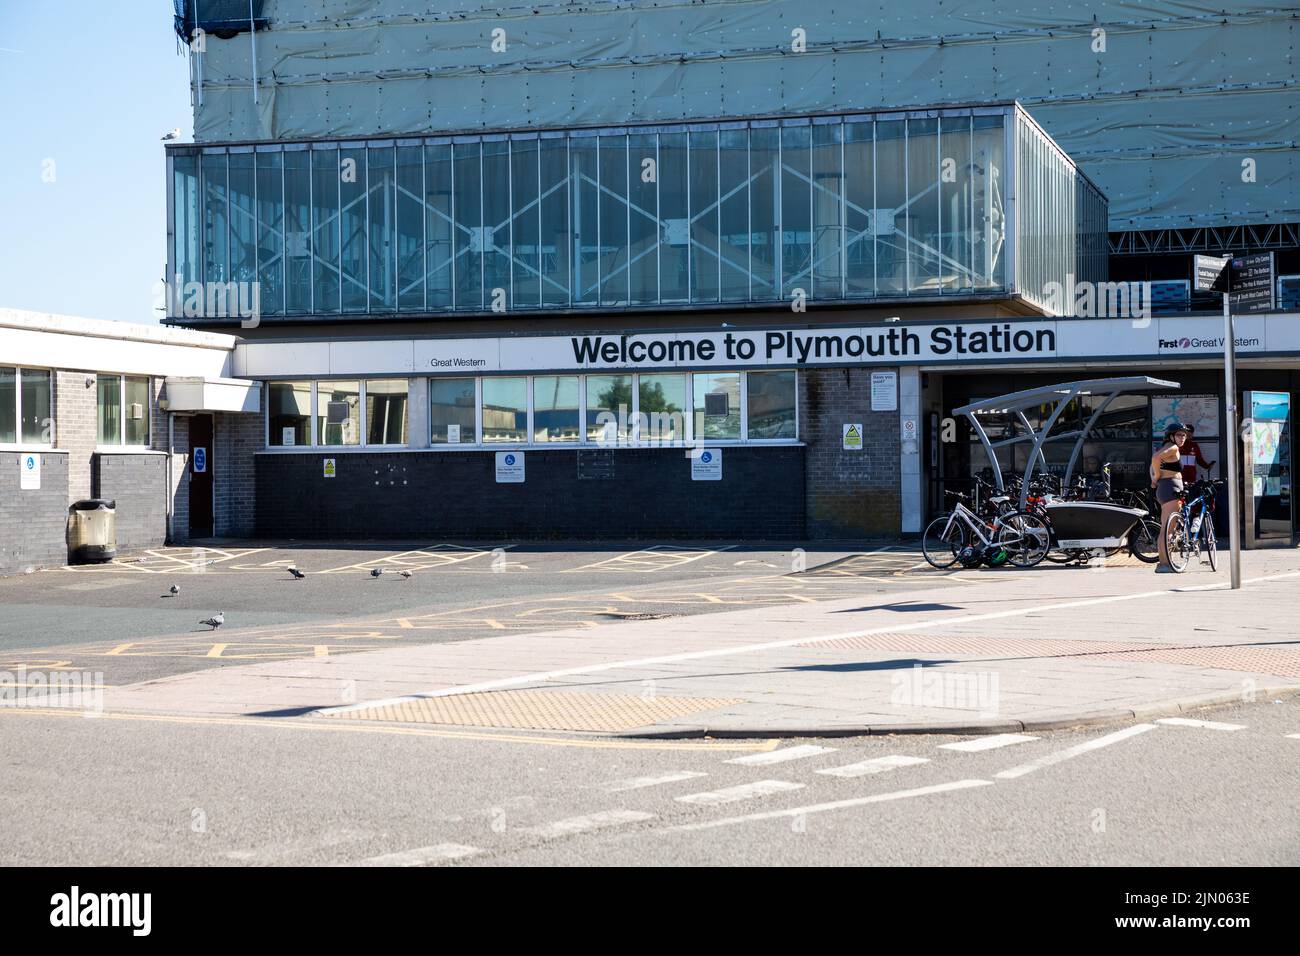 Plymouth Railway Station on a hot sunny Day Stock Photo